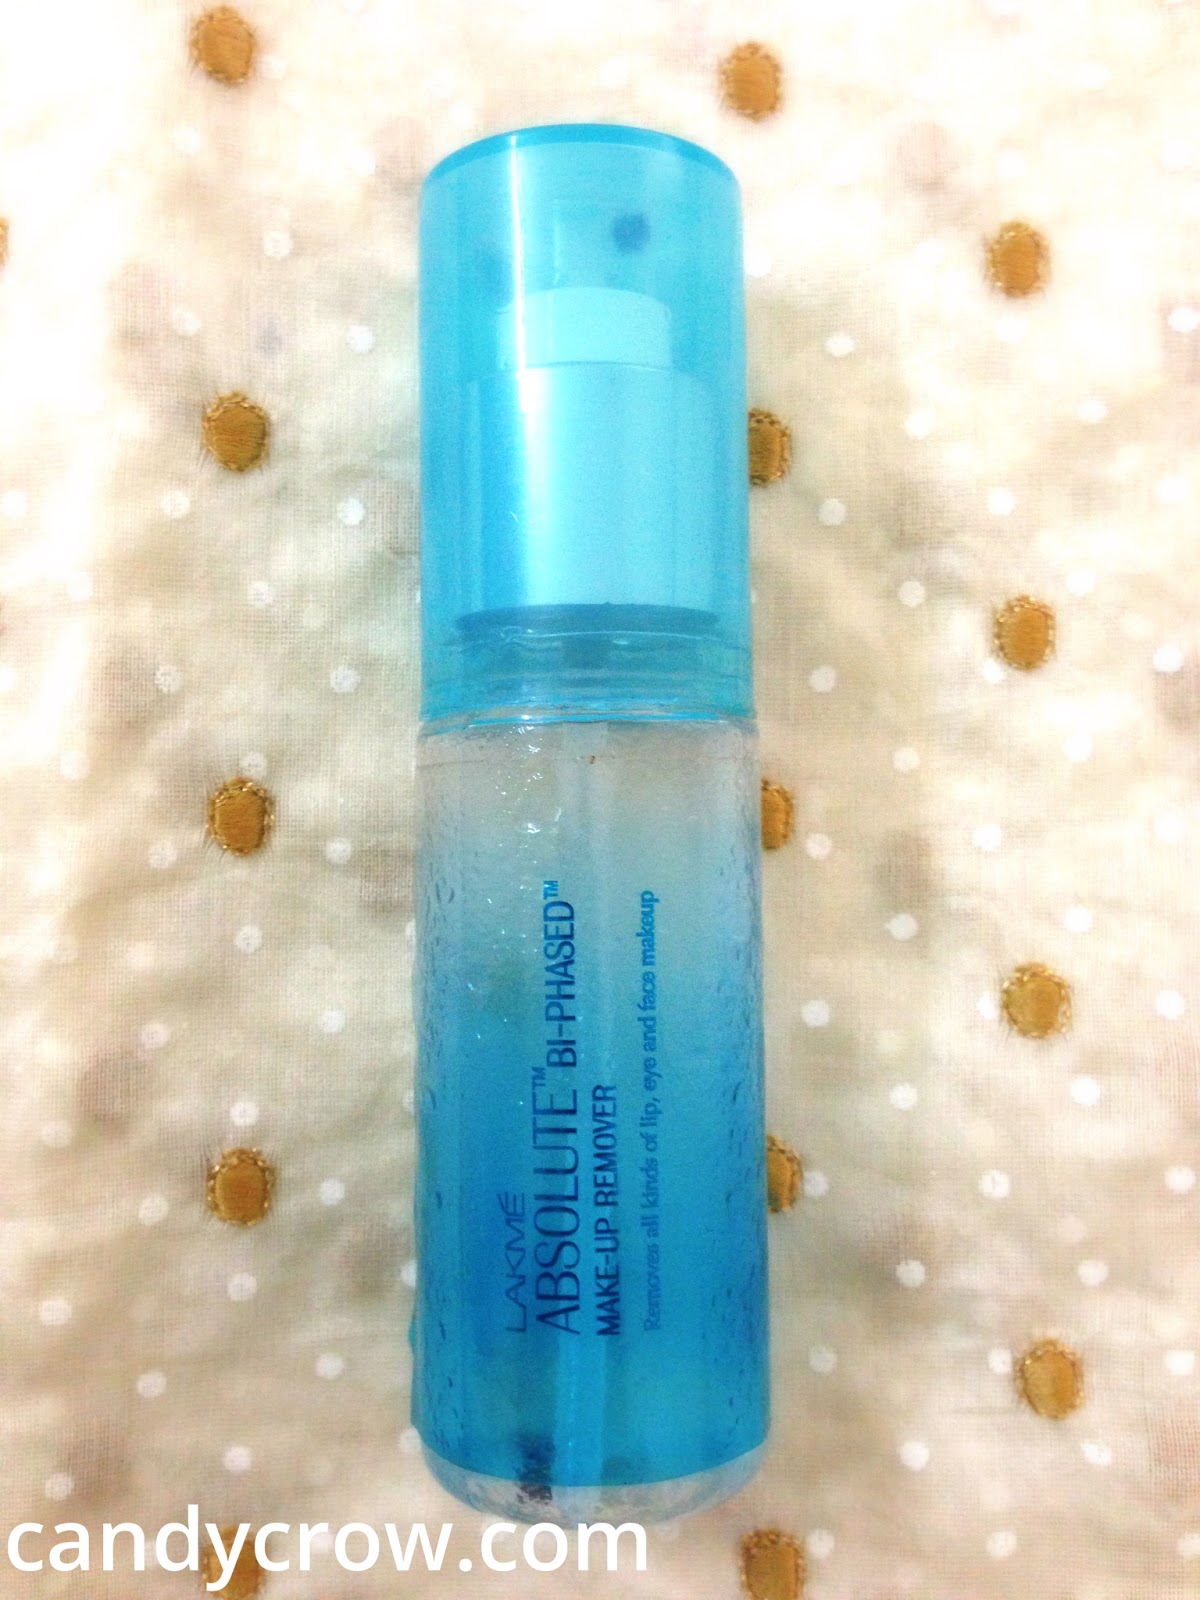 Lakme Absolute Bi-phased Makeup Remover Review